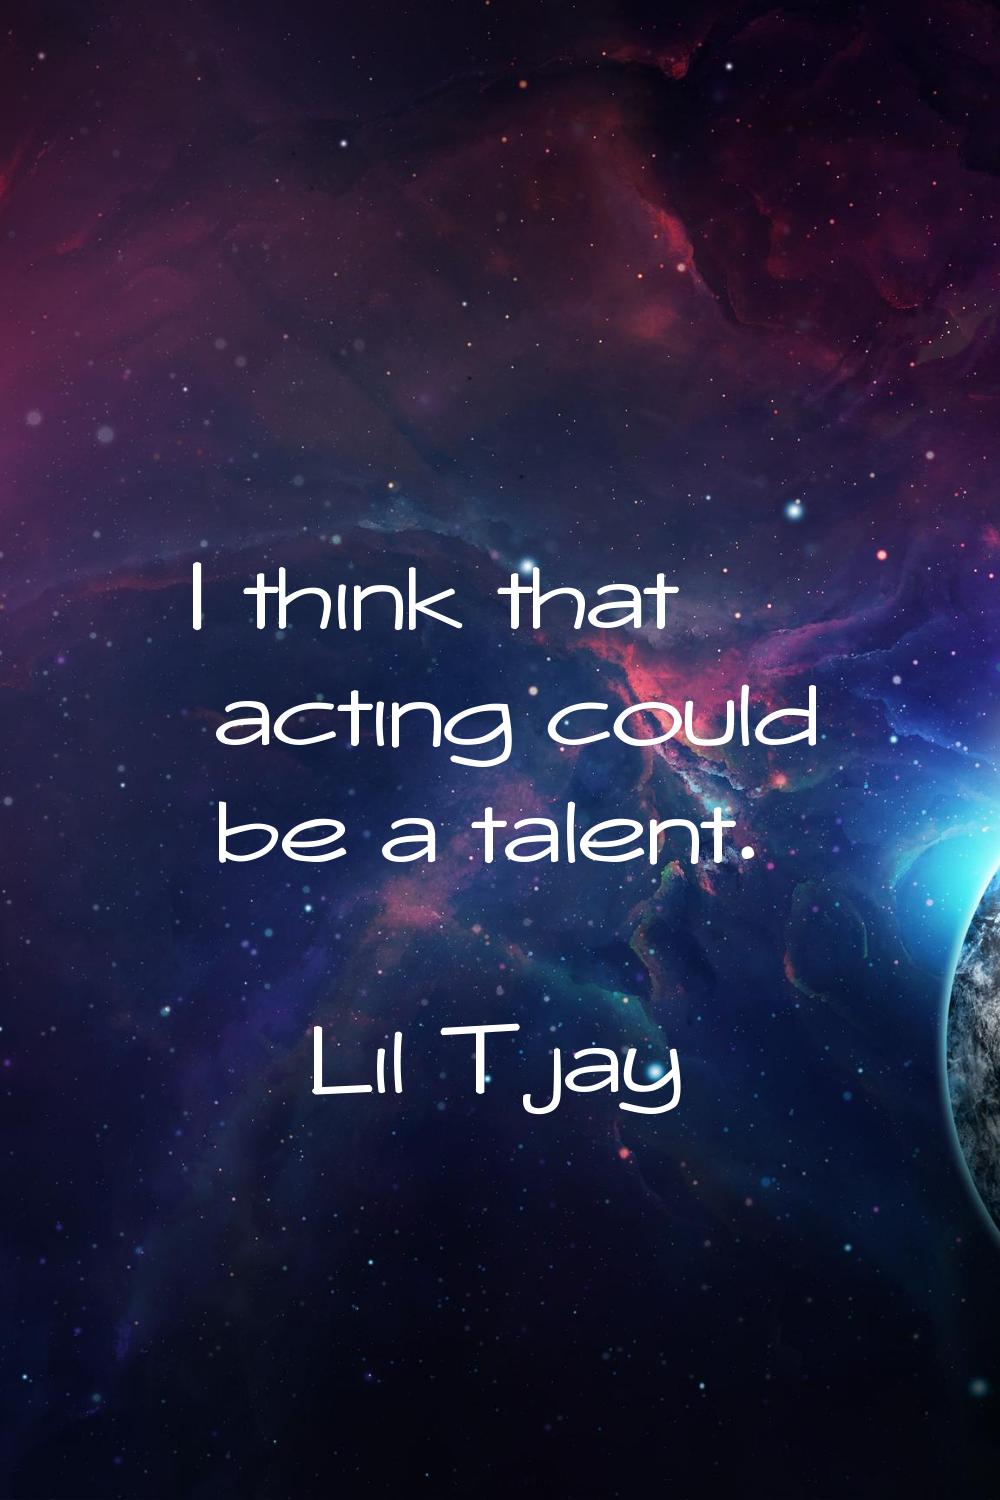 I think that acting could be a talent.